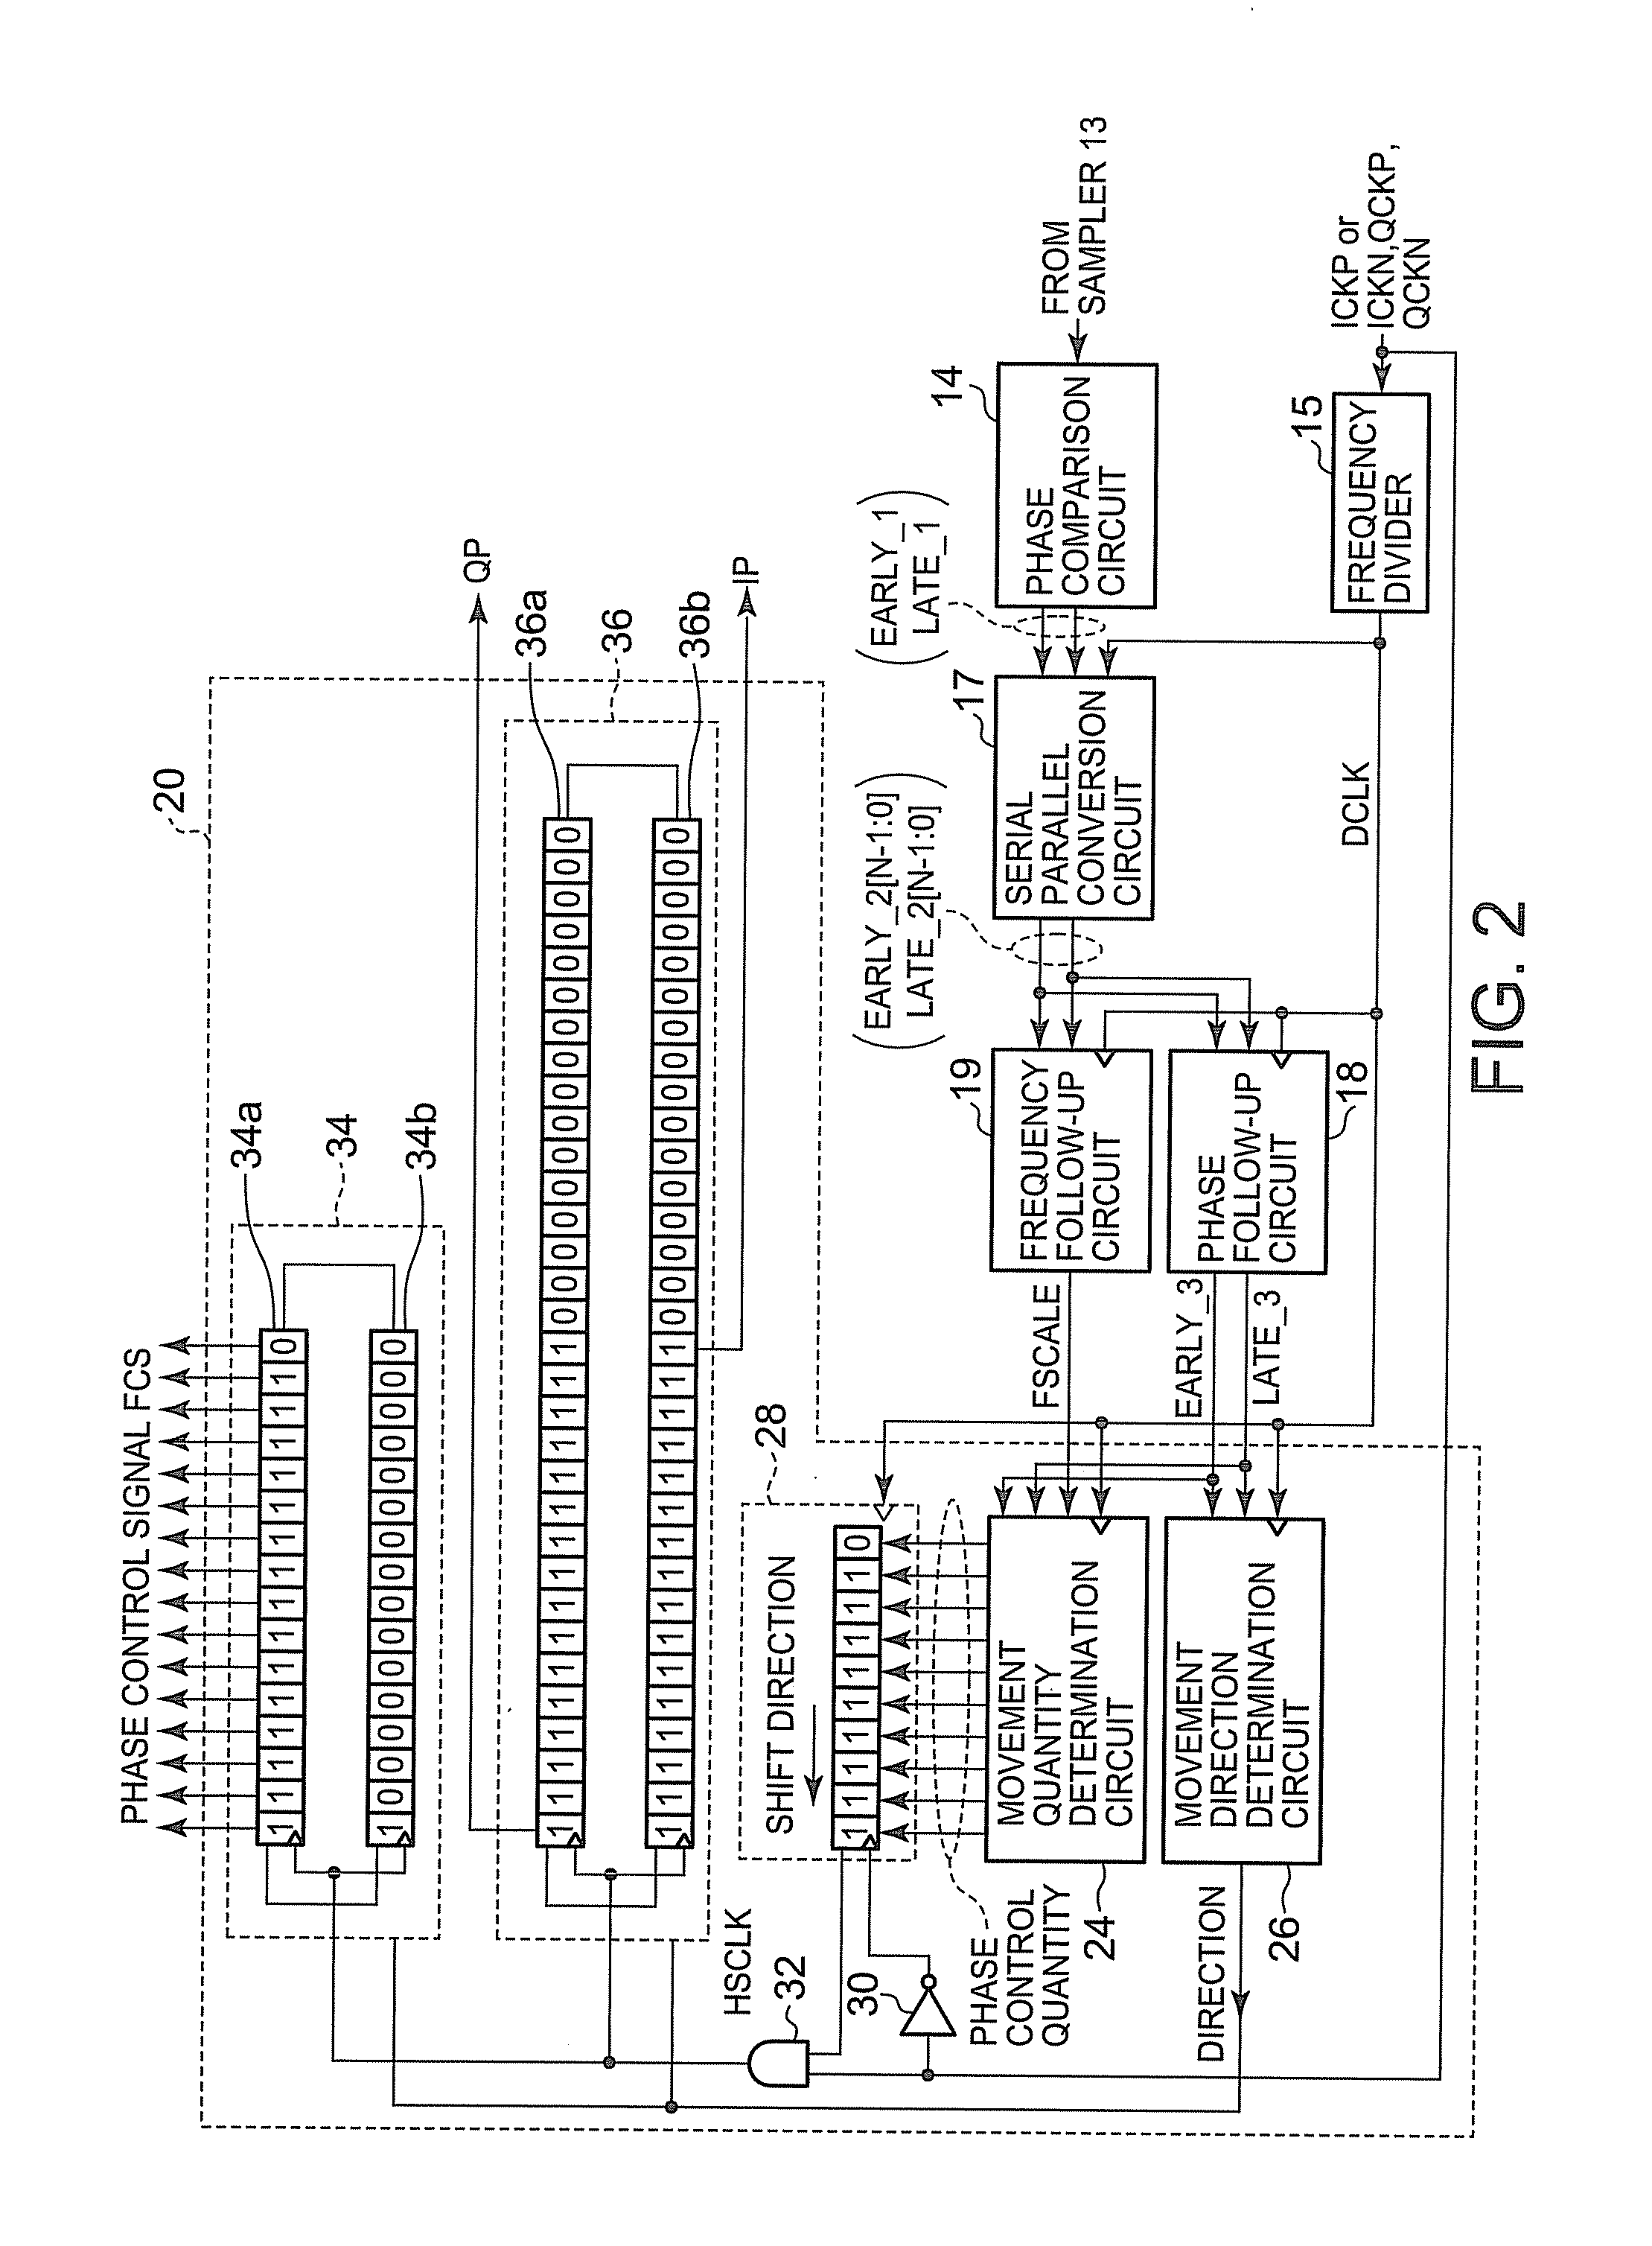 Clock recovery circuit and data recovery circuit